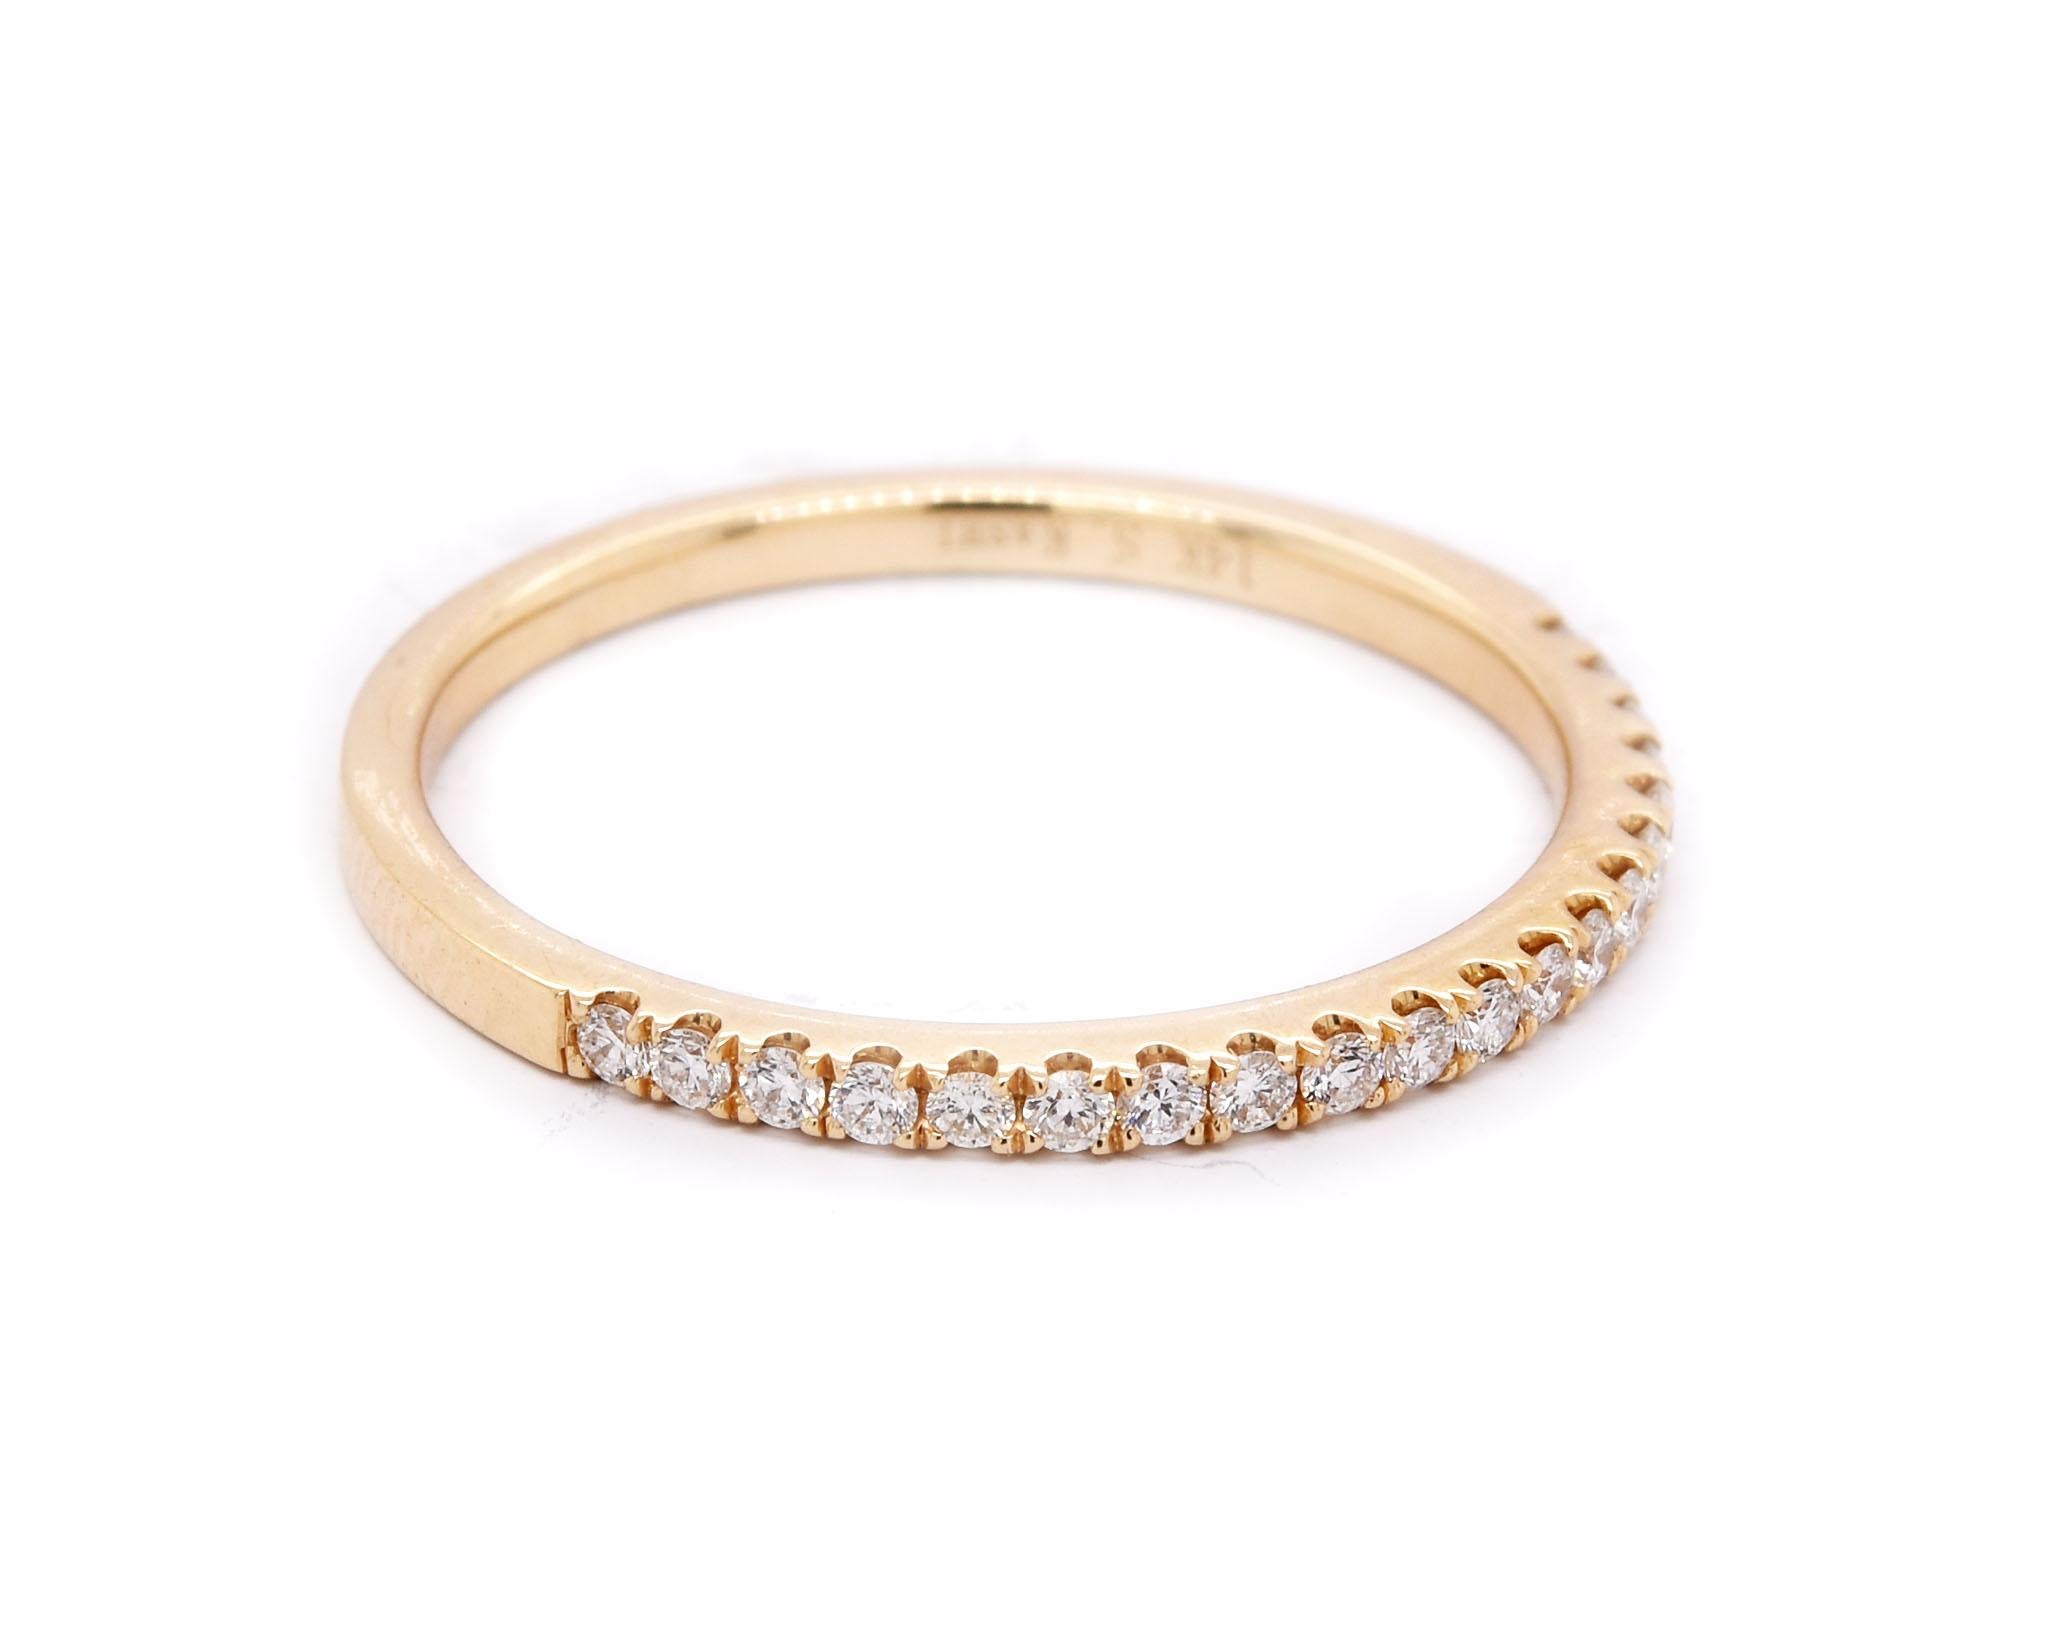 Designer: custom 
Material: 14K yellow gold
Diamonds: 17 round brilliant cut = .24cttw
Color: G
Clarity: VS1
Ring Size: 6.5
Dimensions: ring is 3mm wide
Weight: 1.64 grams